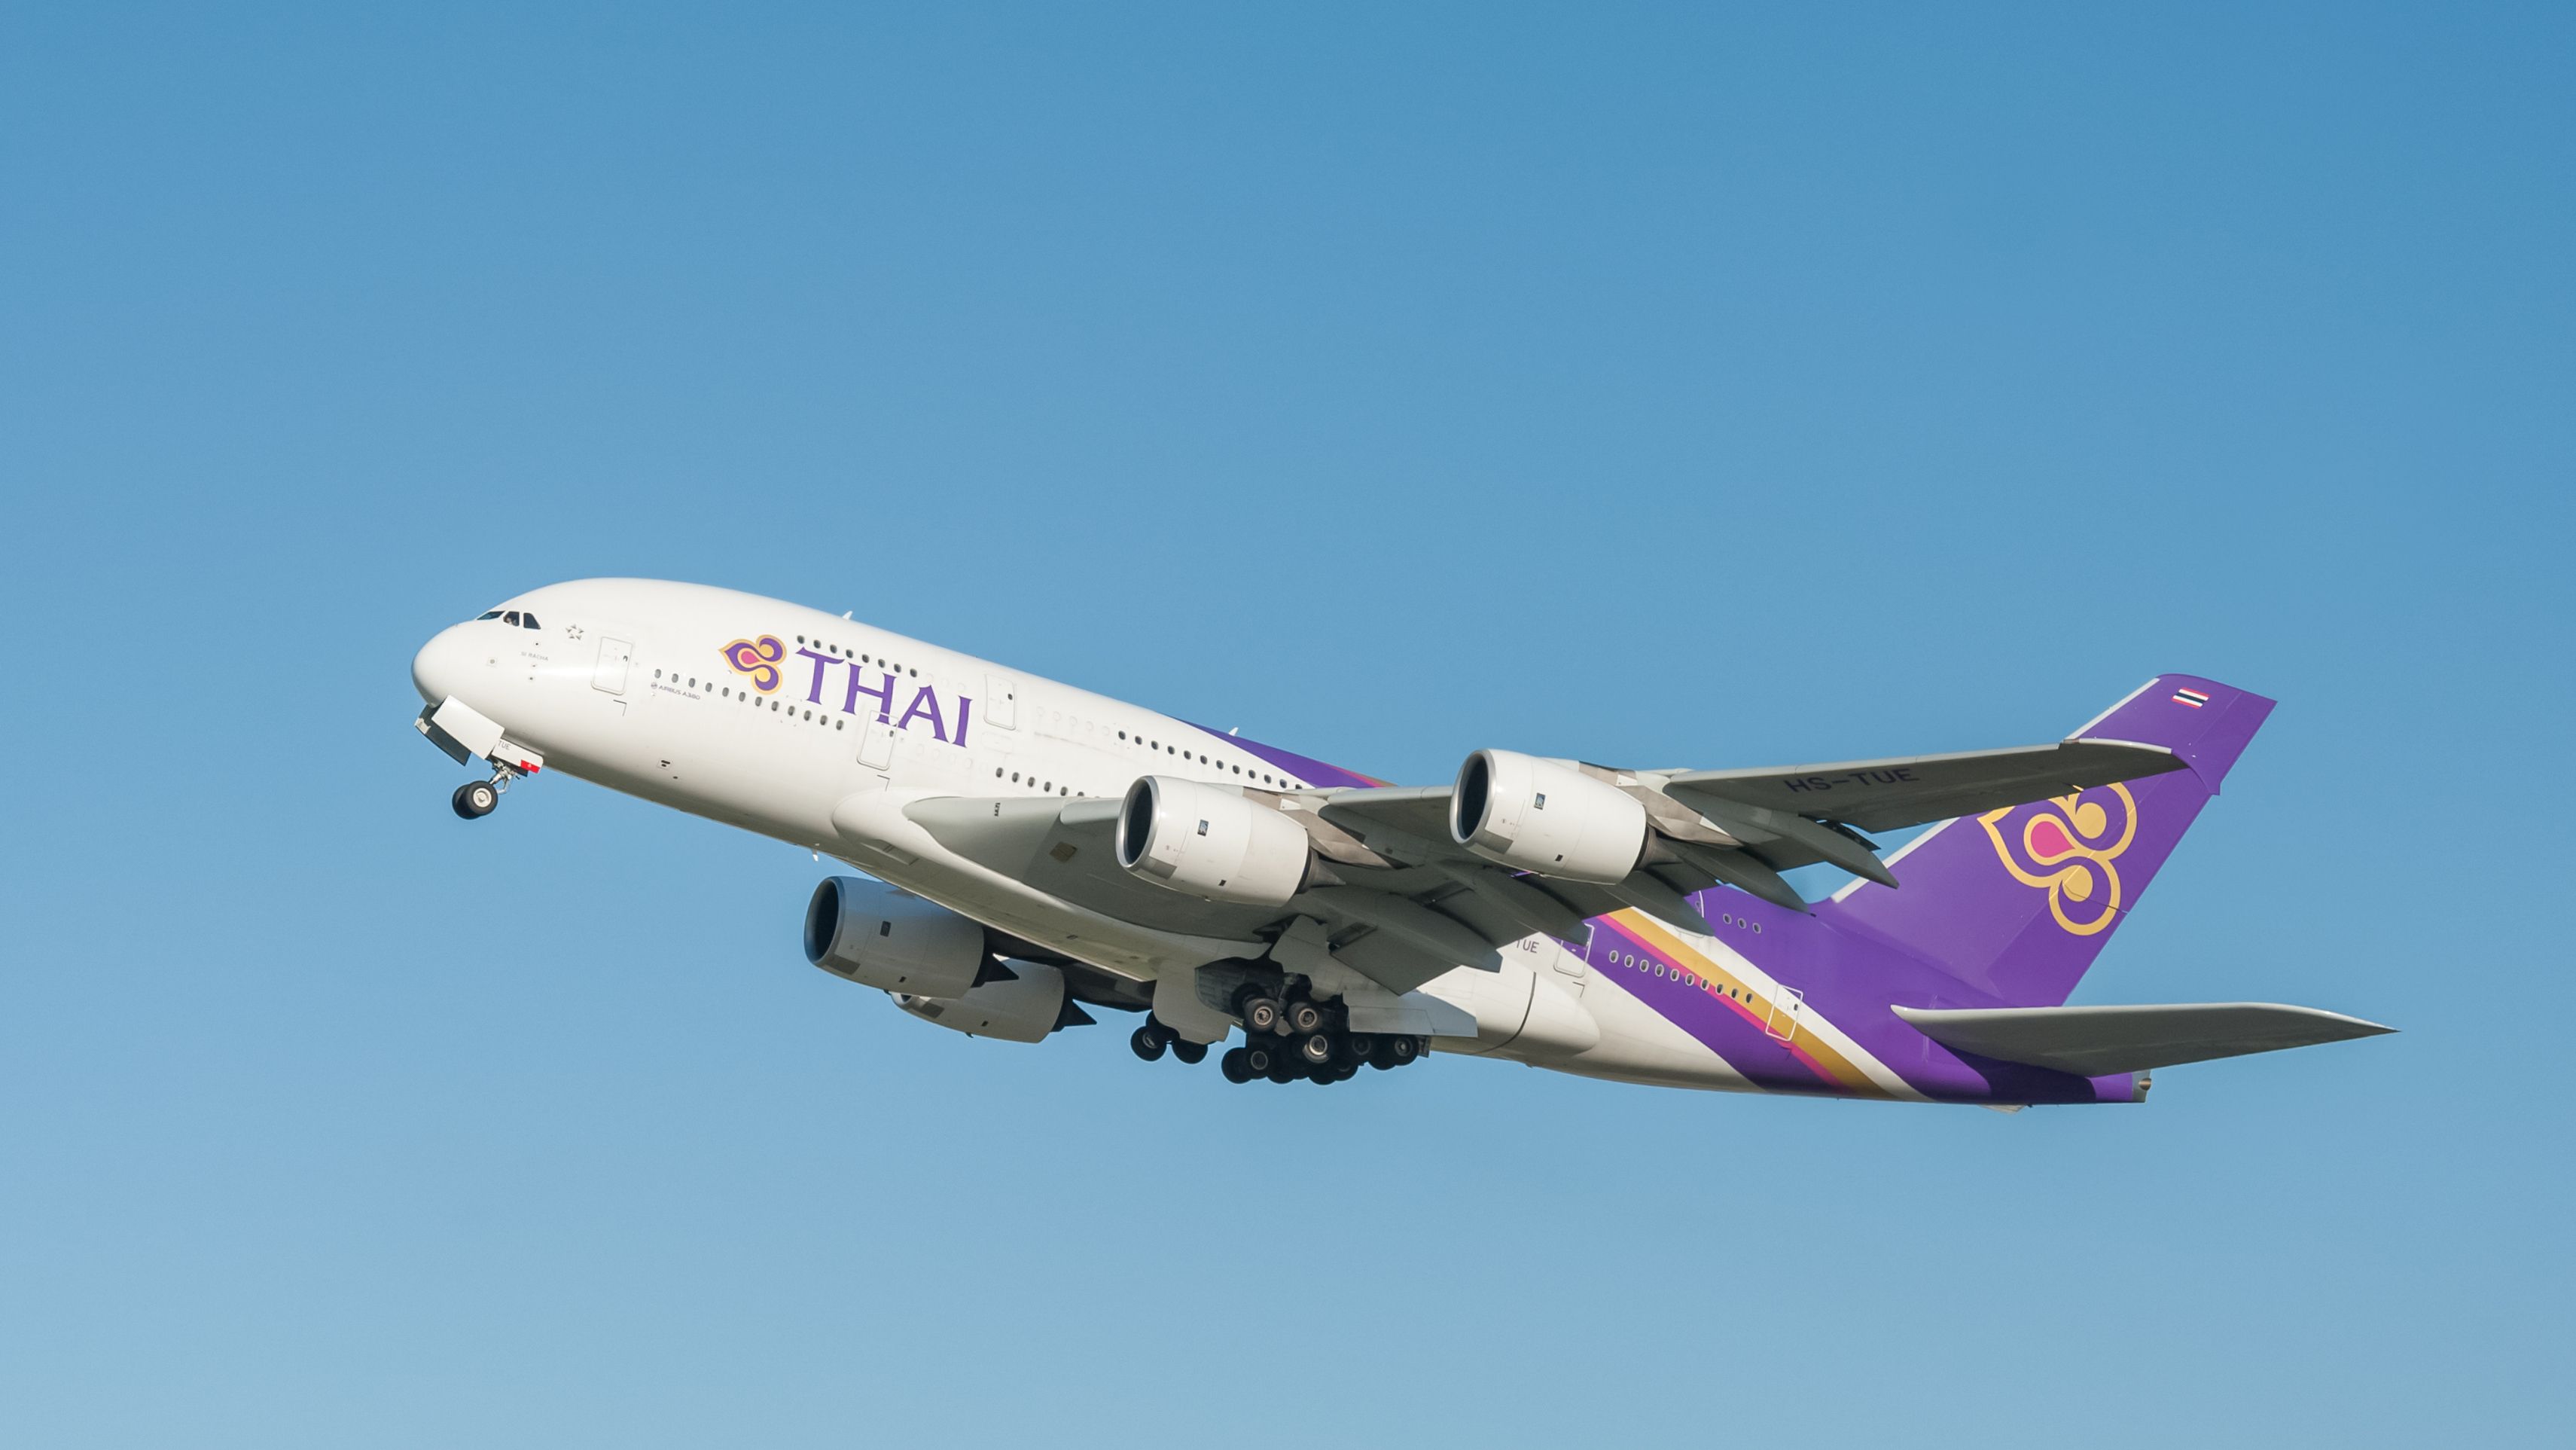 A Thai Airways Airbus A380 Flying in the sky.